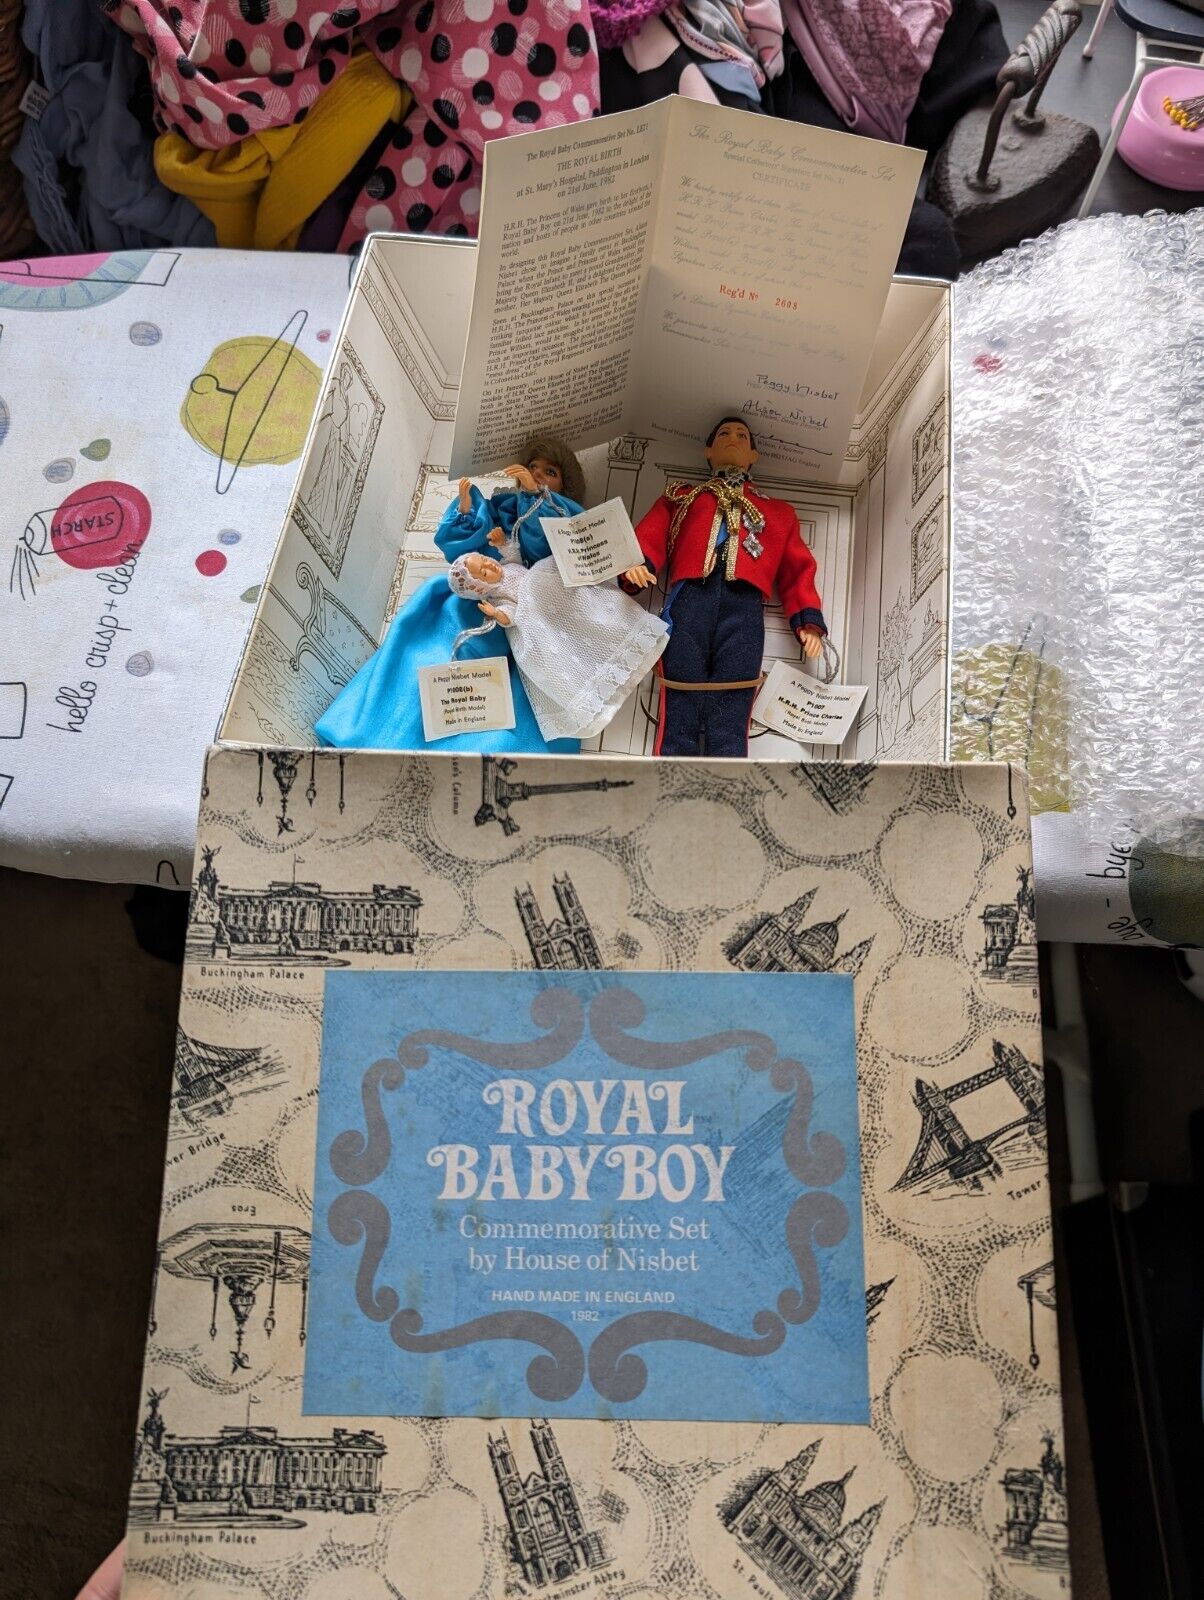 1982 ROYAL BABY BOY COMMEMORATIVE SET BY HOUSE OF NISBET AUTHENTIC CIRTIFICATE